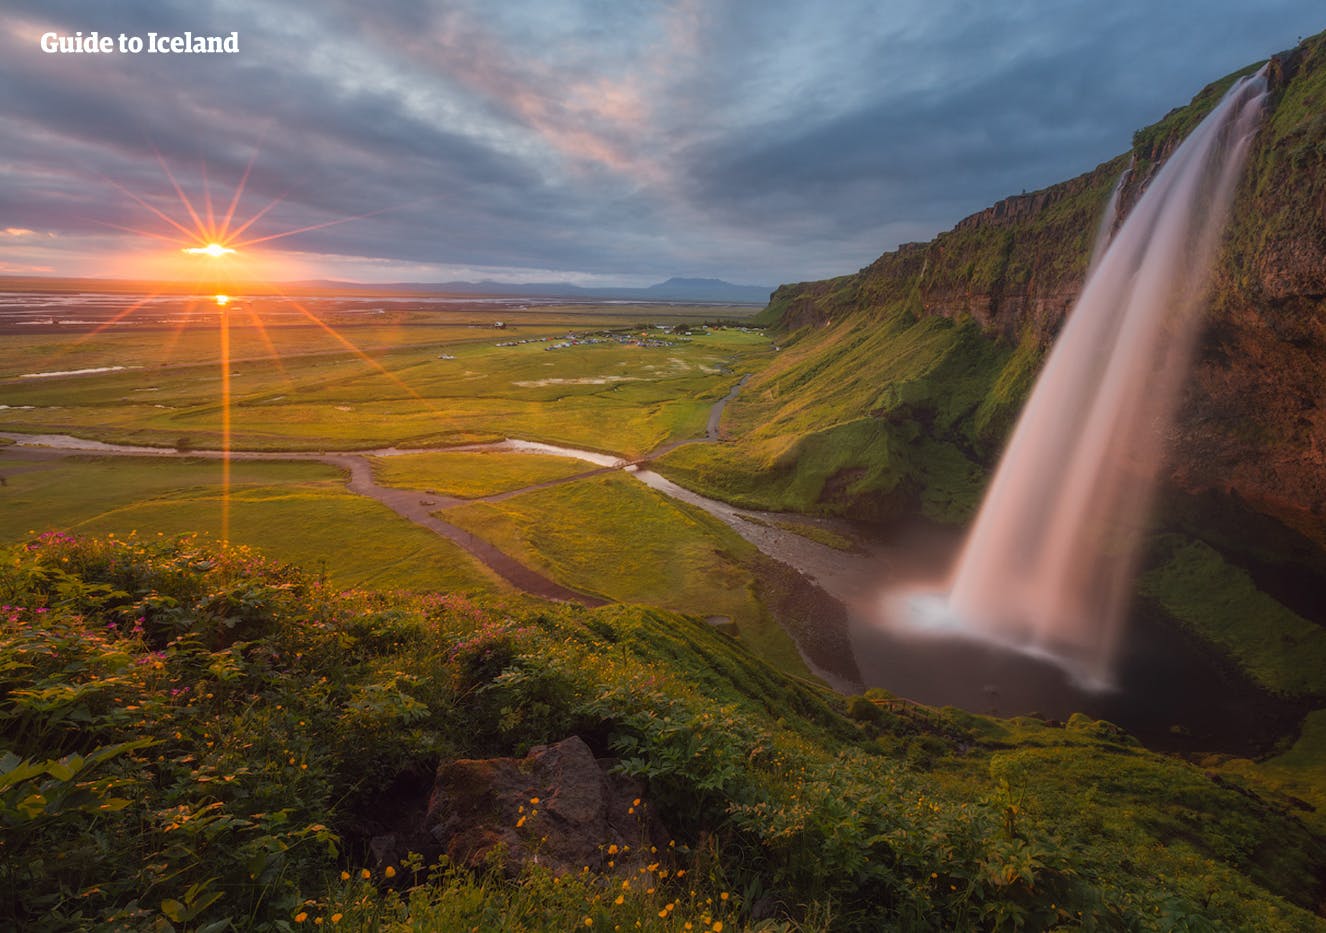 The sun sets on one of Iceland's most unique waterfalls, Seljalandsfoss.